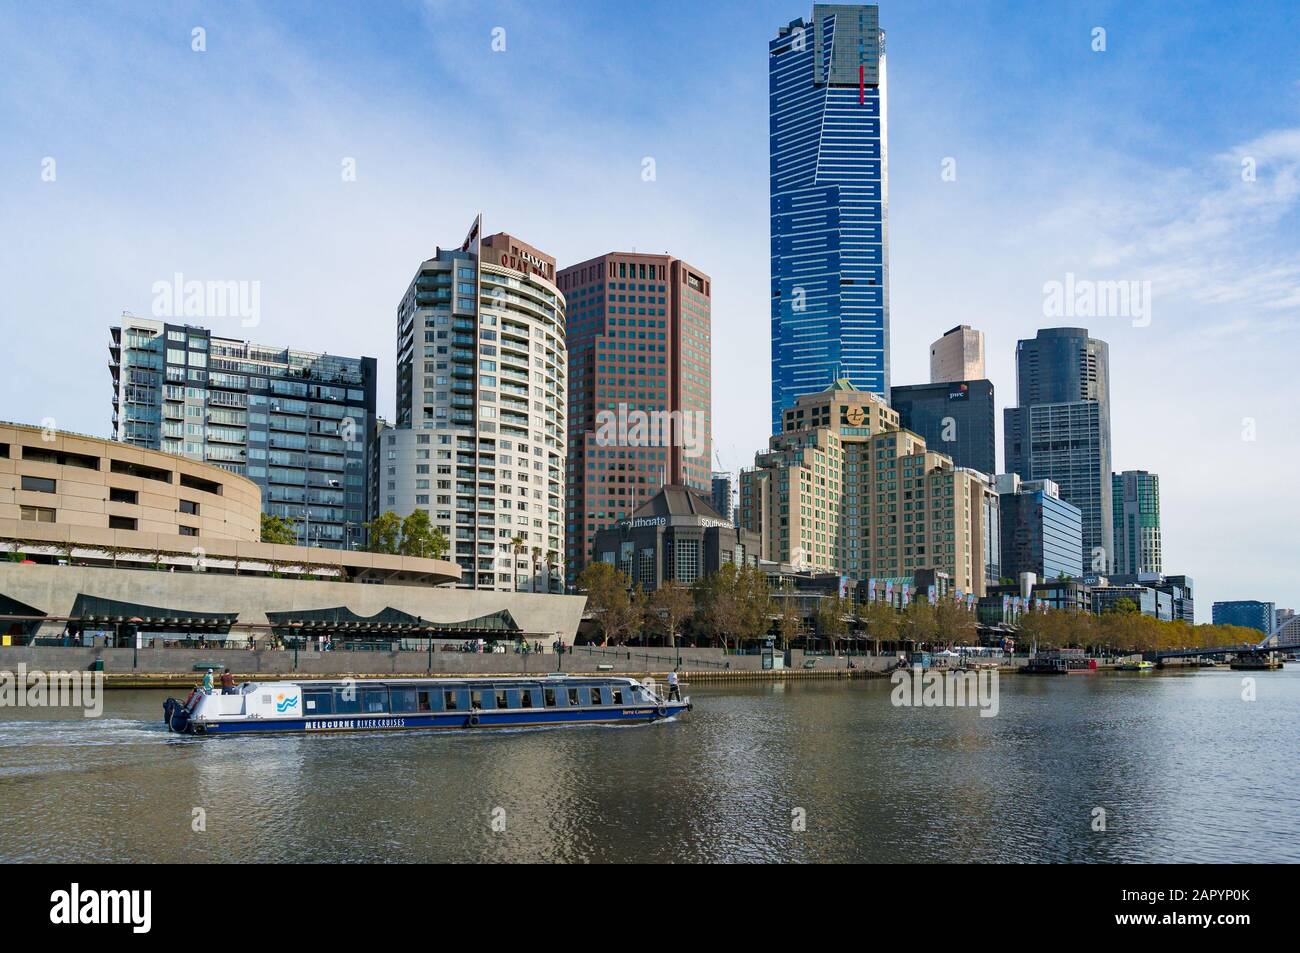 Melbourne, Australia - April 20, 2017: Melbourne river cruises boat with Eureka tower and Melbourne cityscape on the background Stock Photo